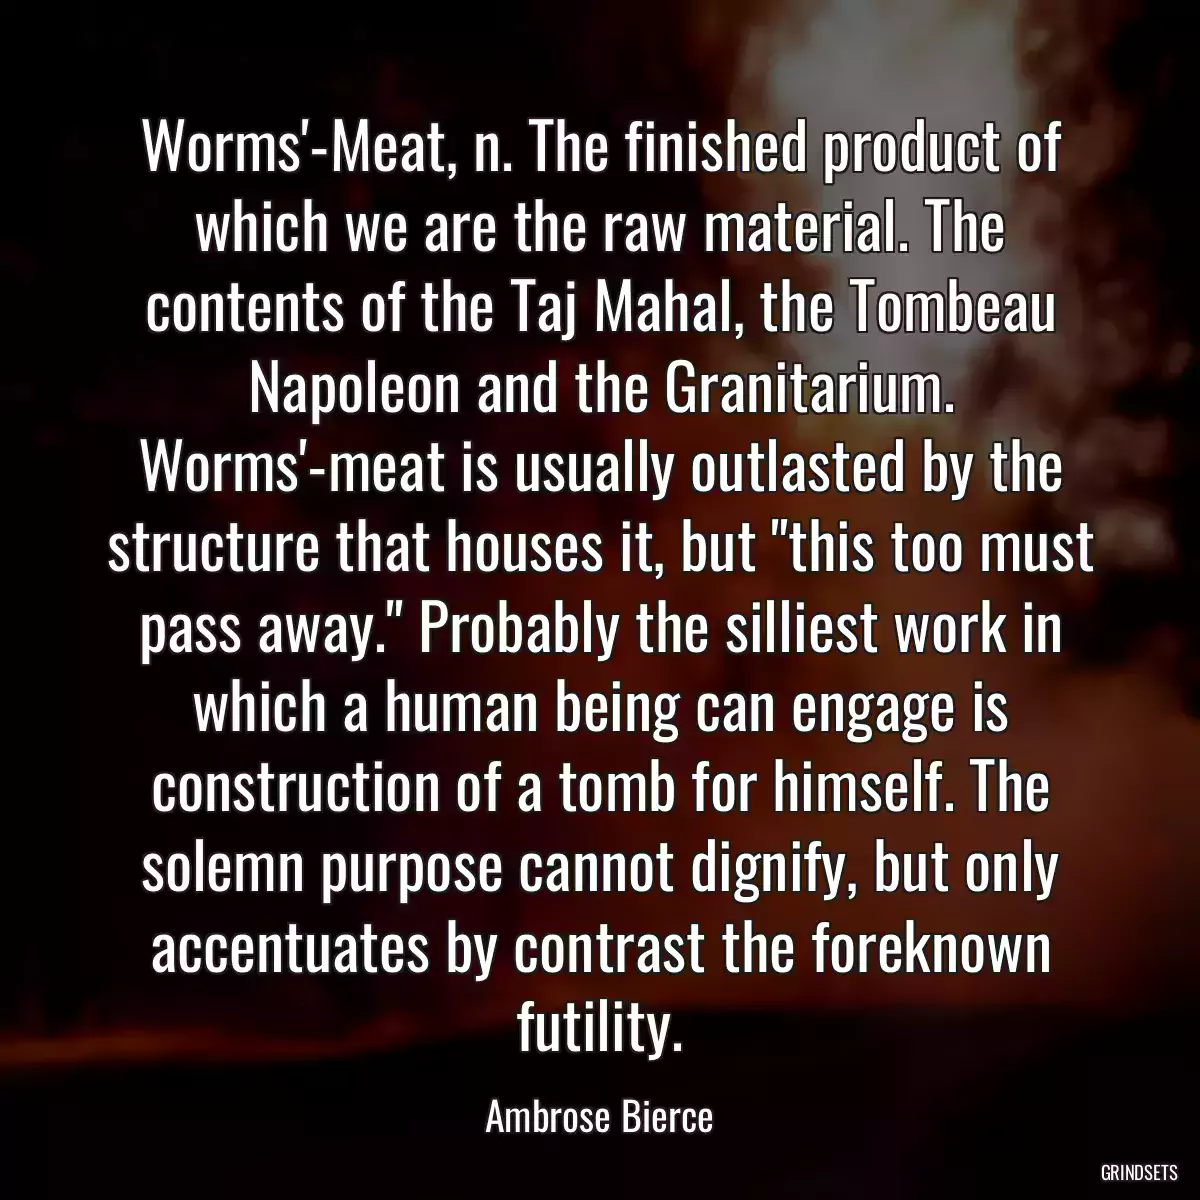 Worms\'-Meat, n. The finished product of which we are the raw material. The contents of the Taj Mahal, the Tombeau Napoleon and the Granitarium. Worms\'-meat is usually outlasted by the structure that houses it, but \